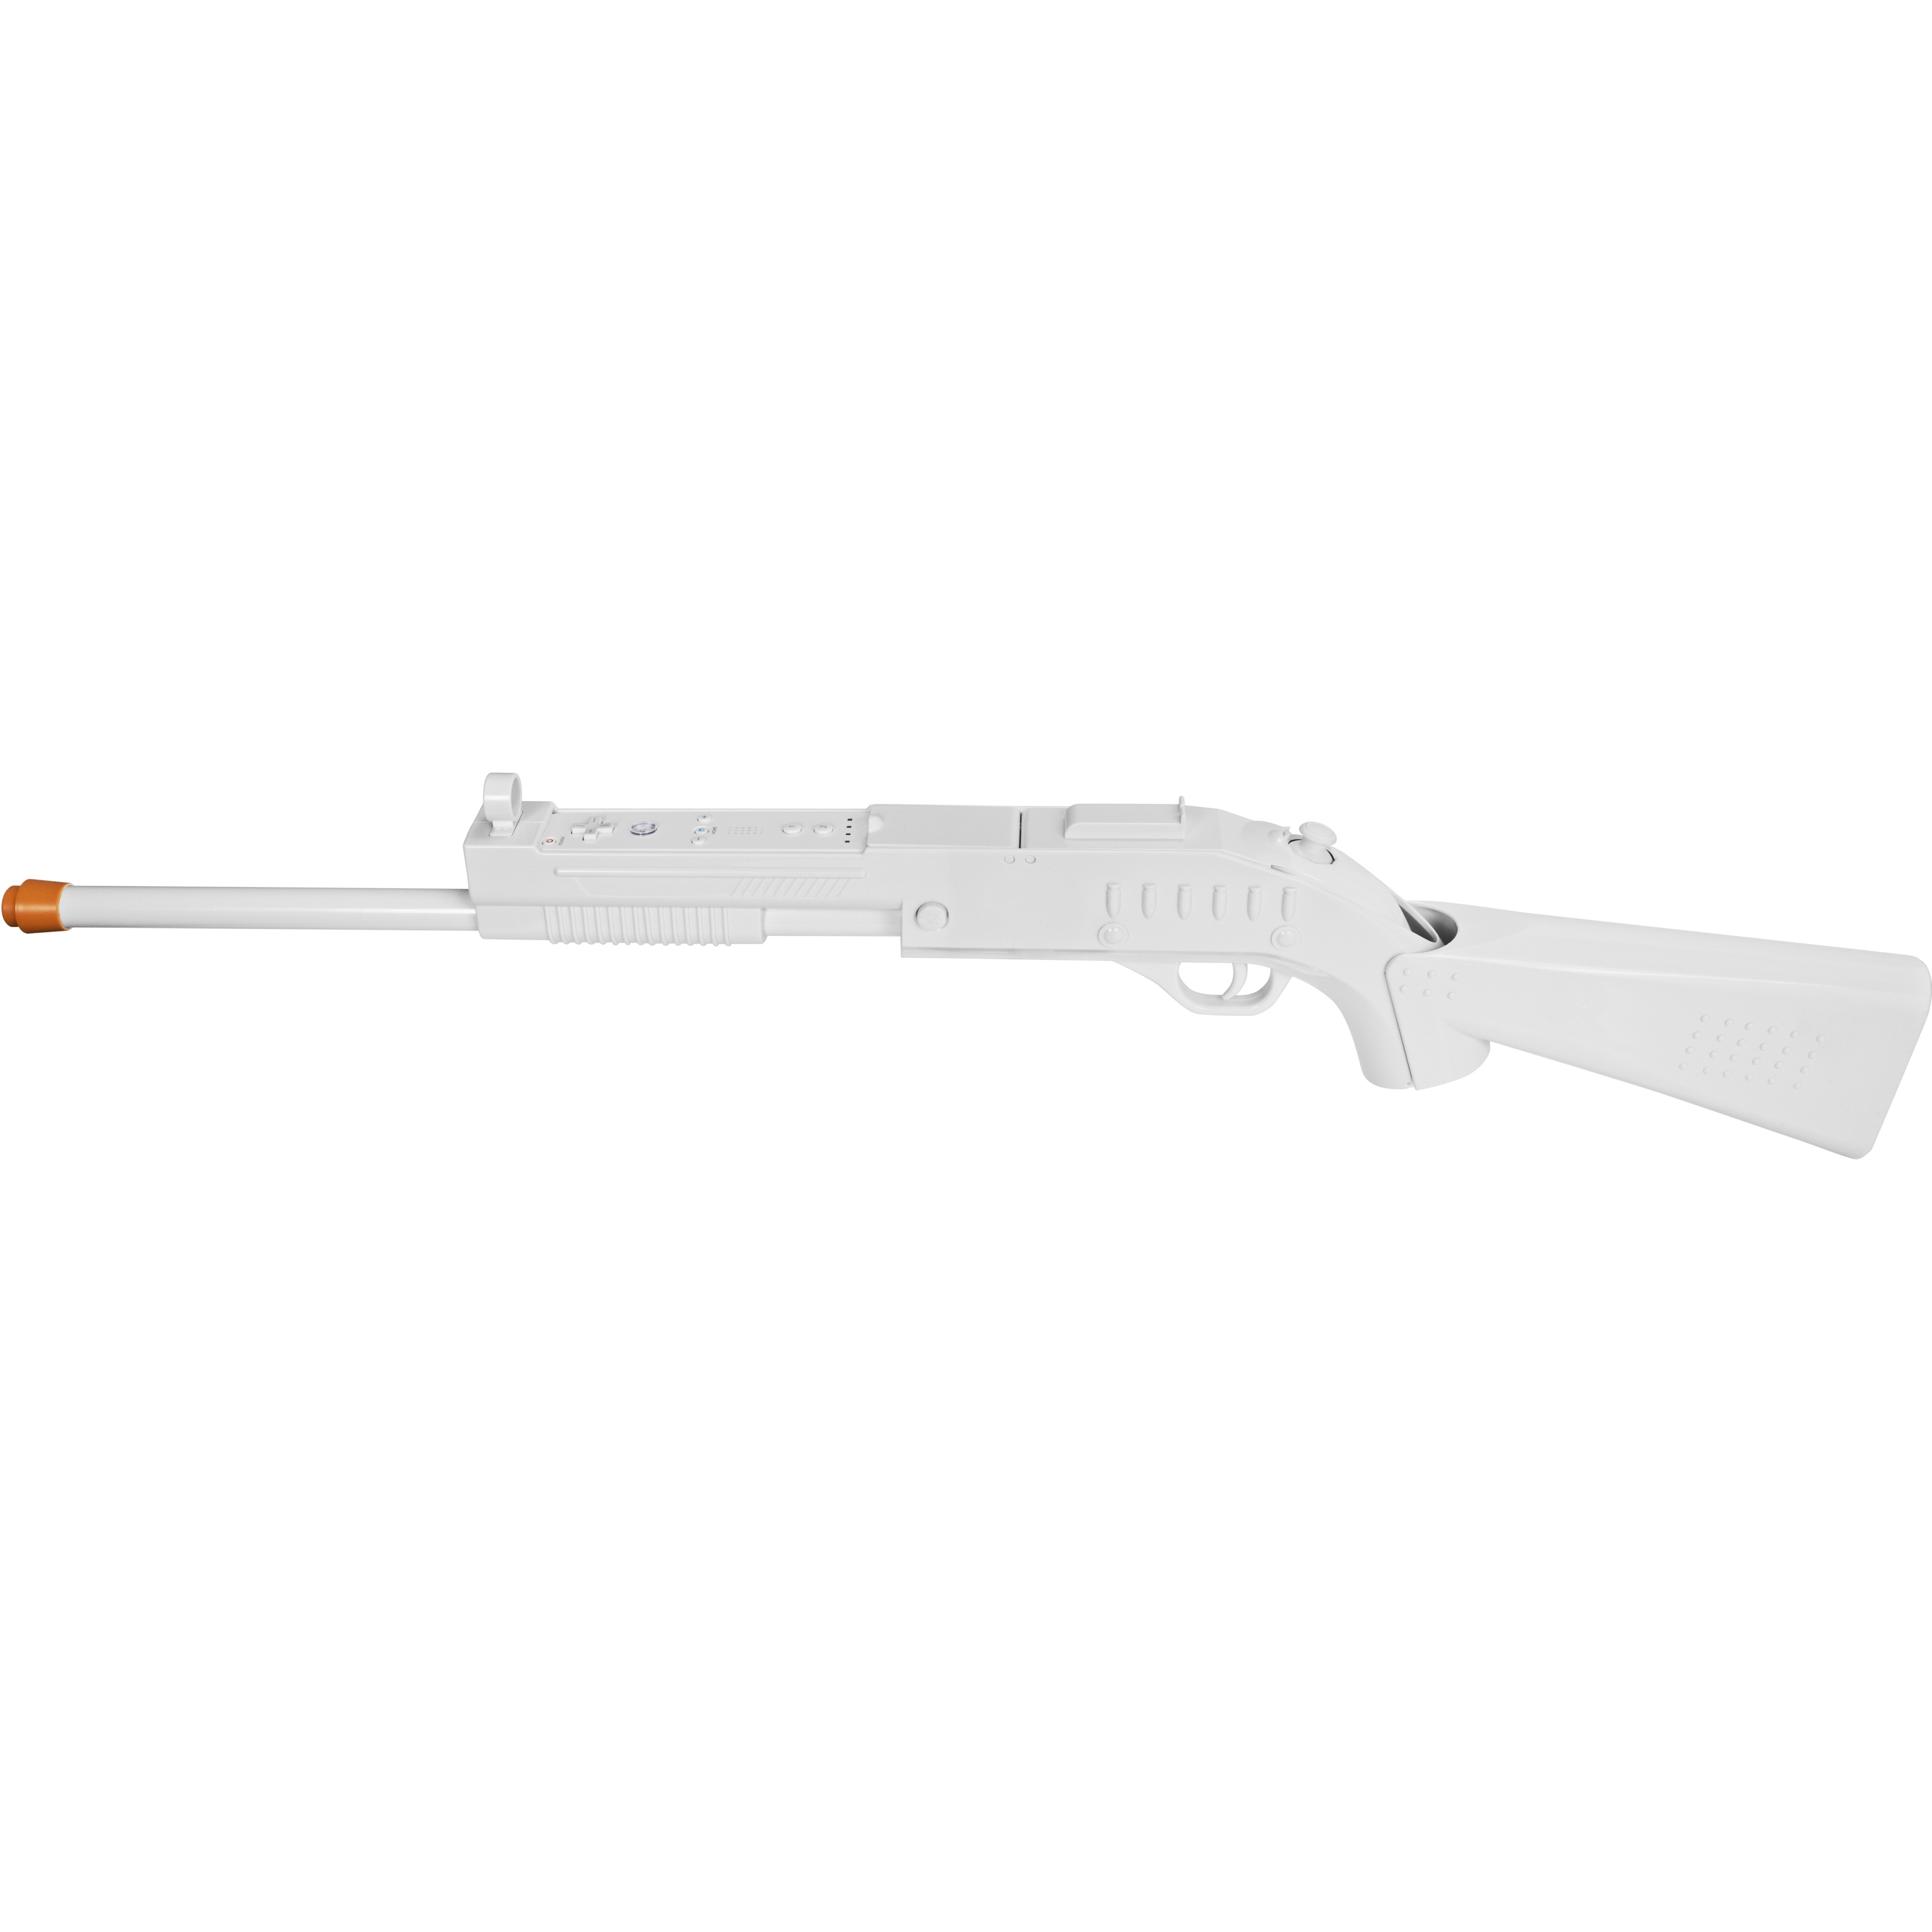 CTA Digital Sure Shot Rifle for Wii - image 1 of 3